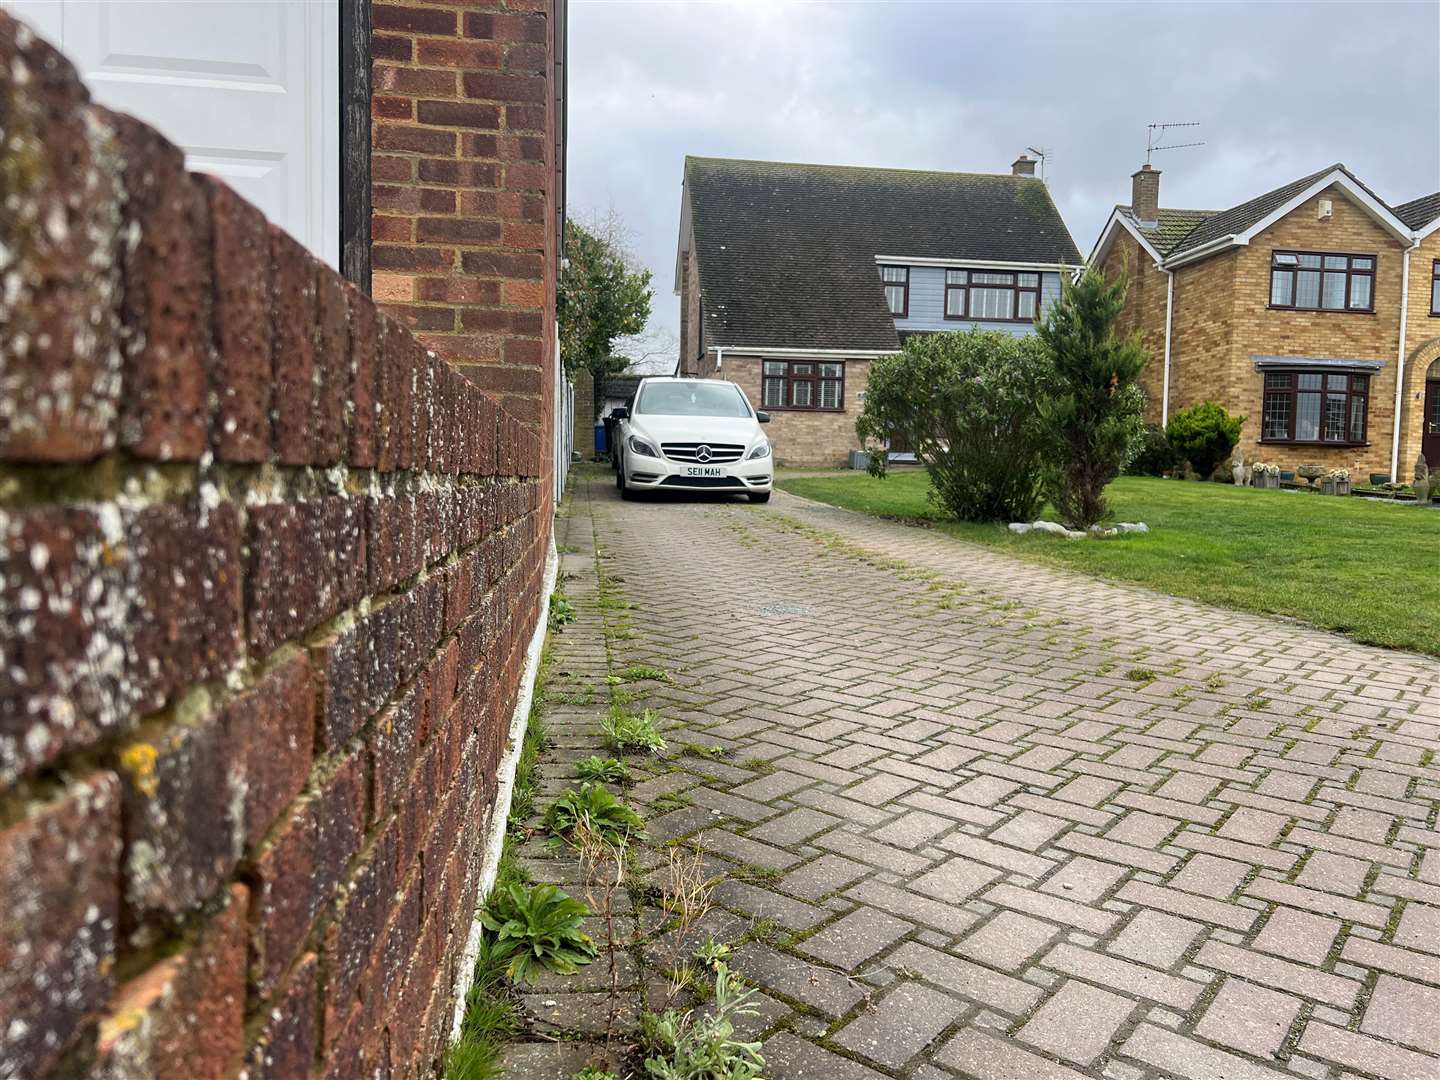 Selma Mawhinney's driveway on Uplands Way, Sheppey